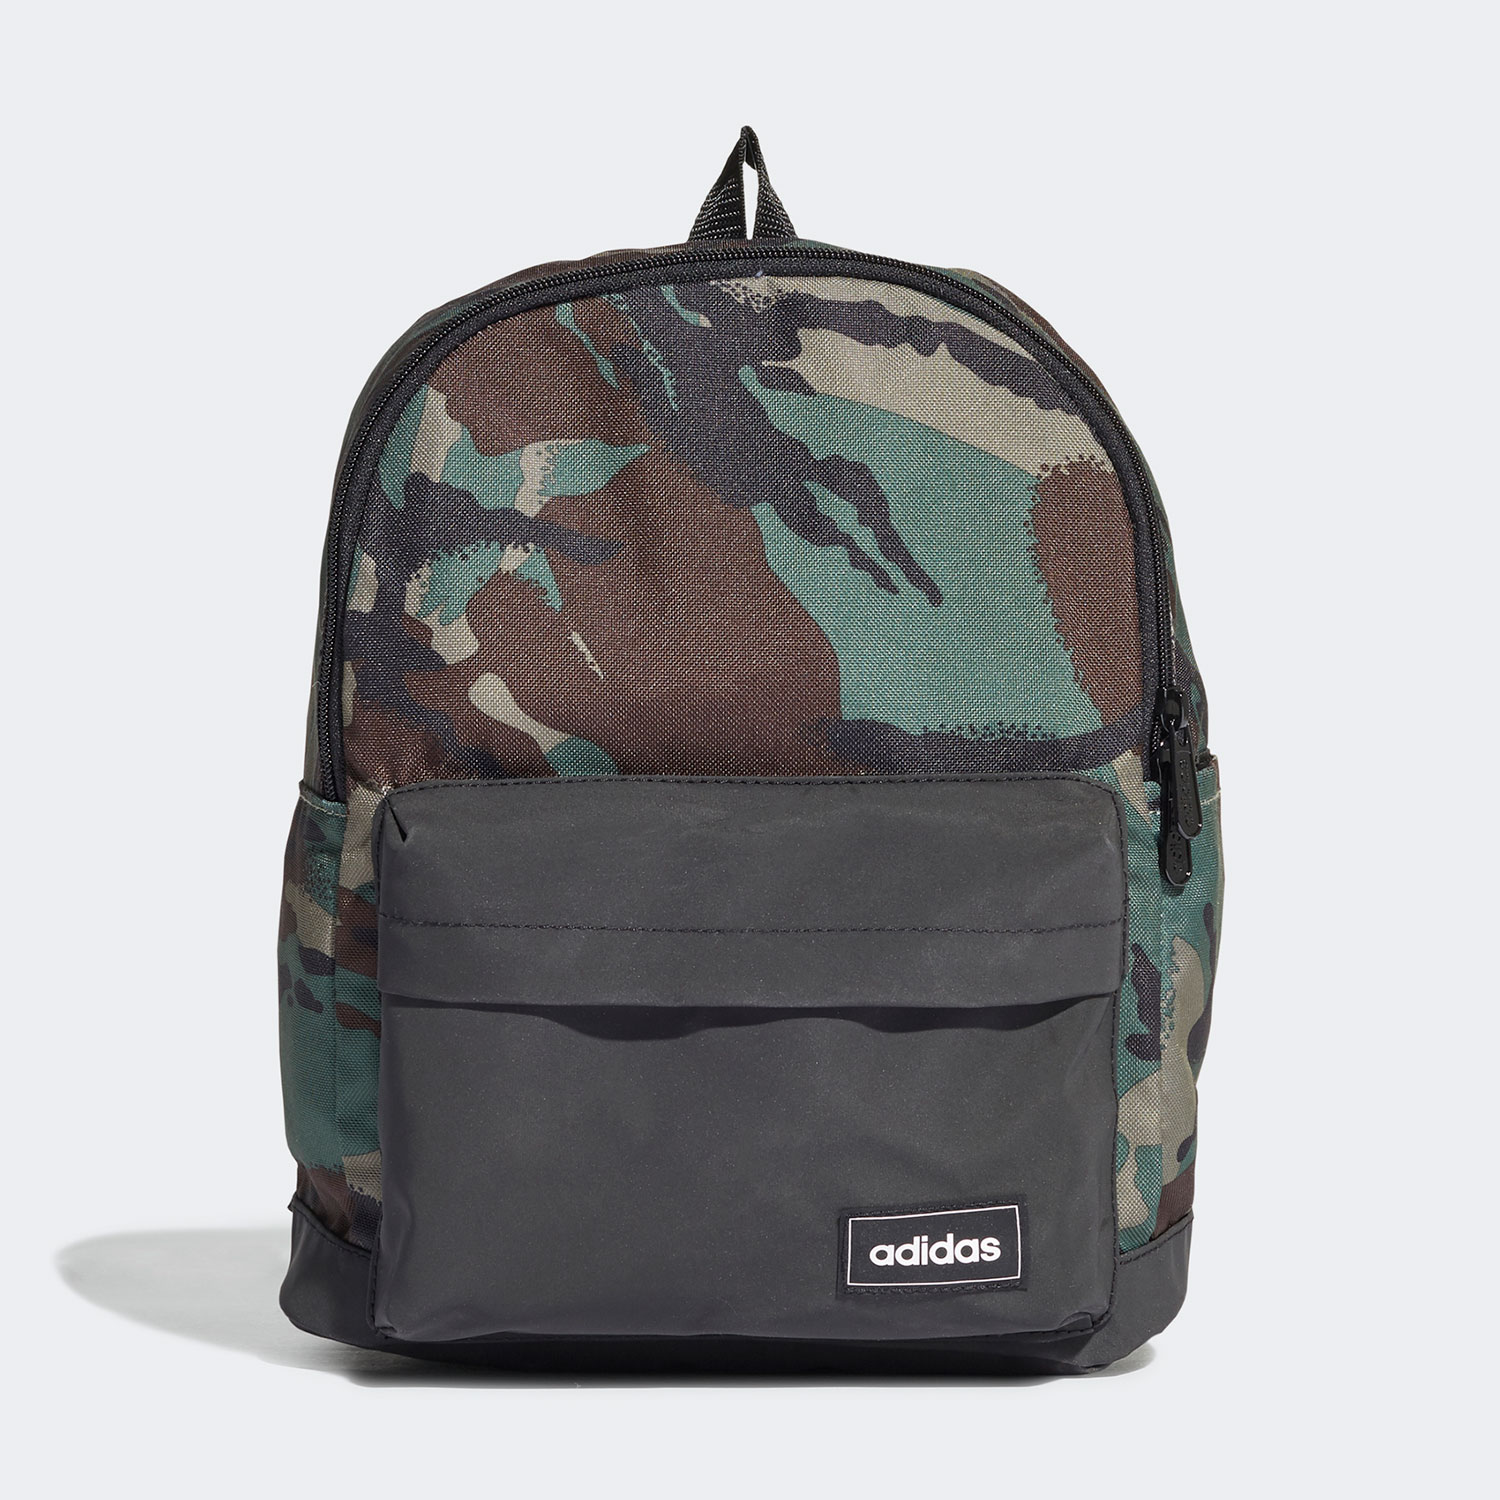 CLASSIC CAMOUFLAGE SMALL BACKPACK ΠΑΡΑΛΛΑΓΗ